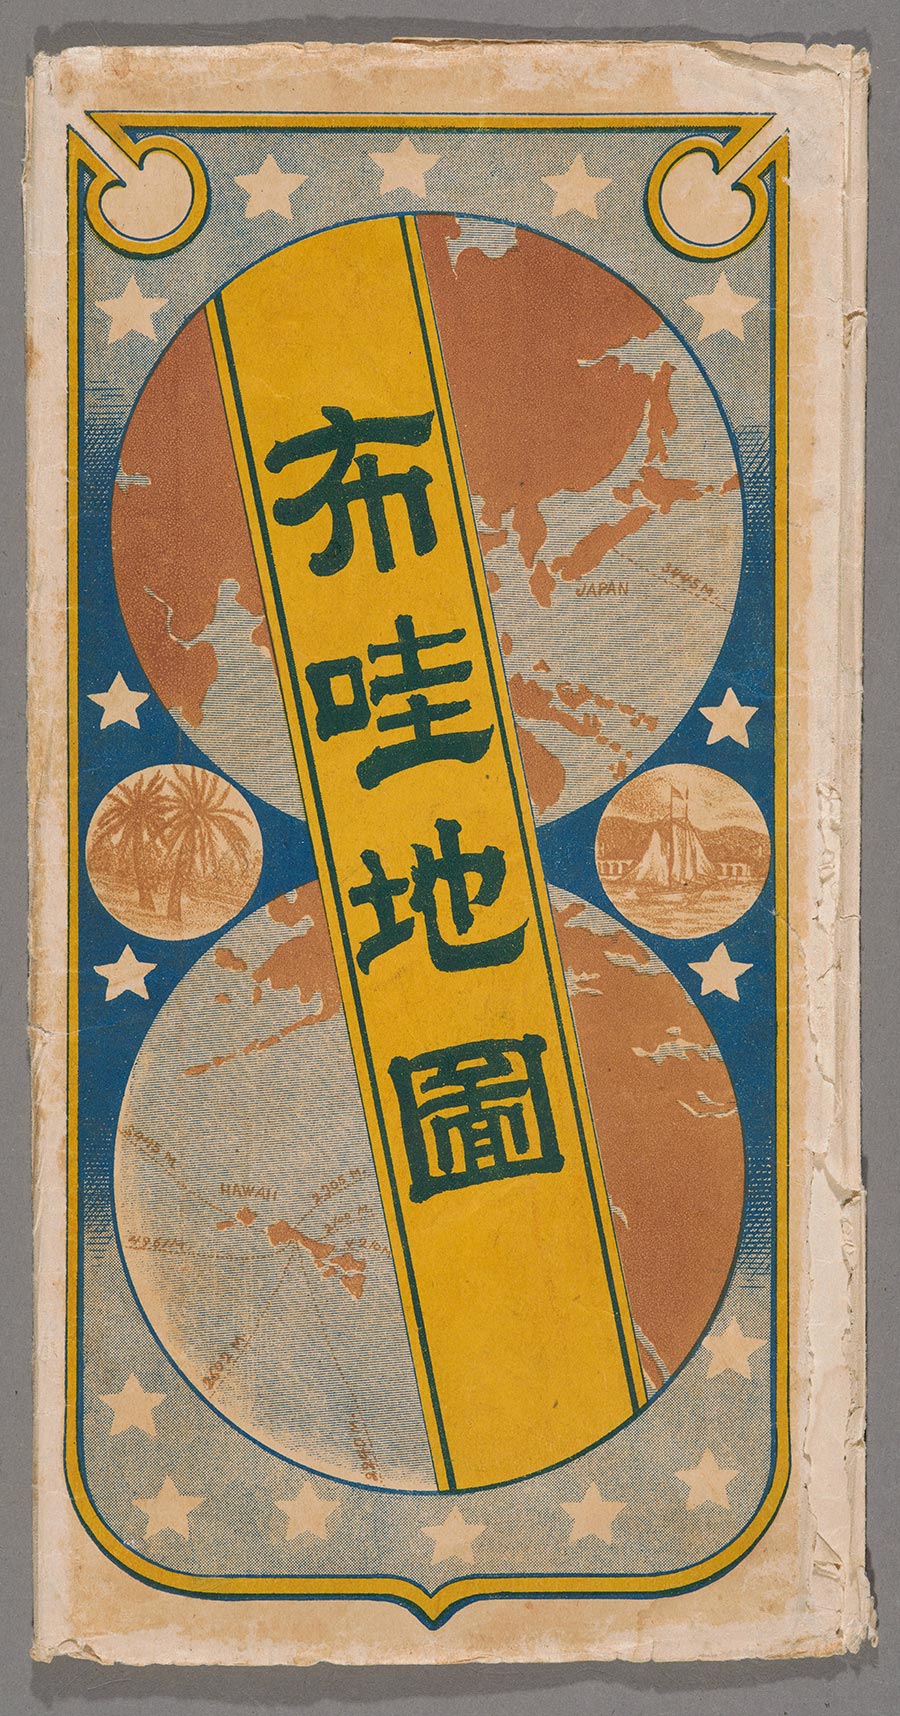 Cover of Hawaiʻi map with Japanese writing.